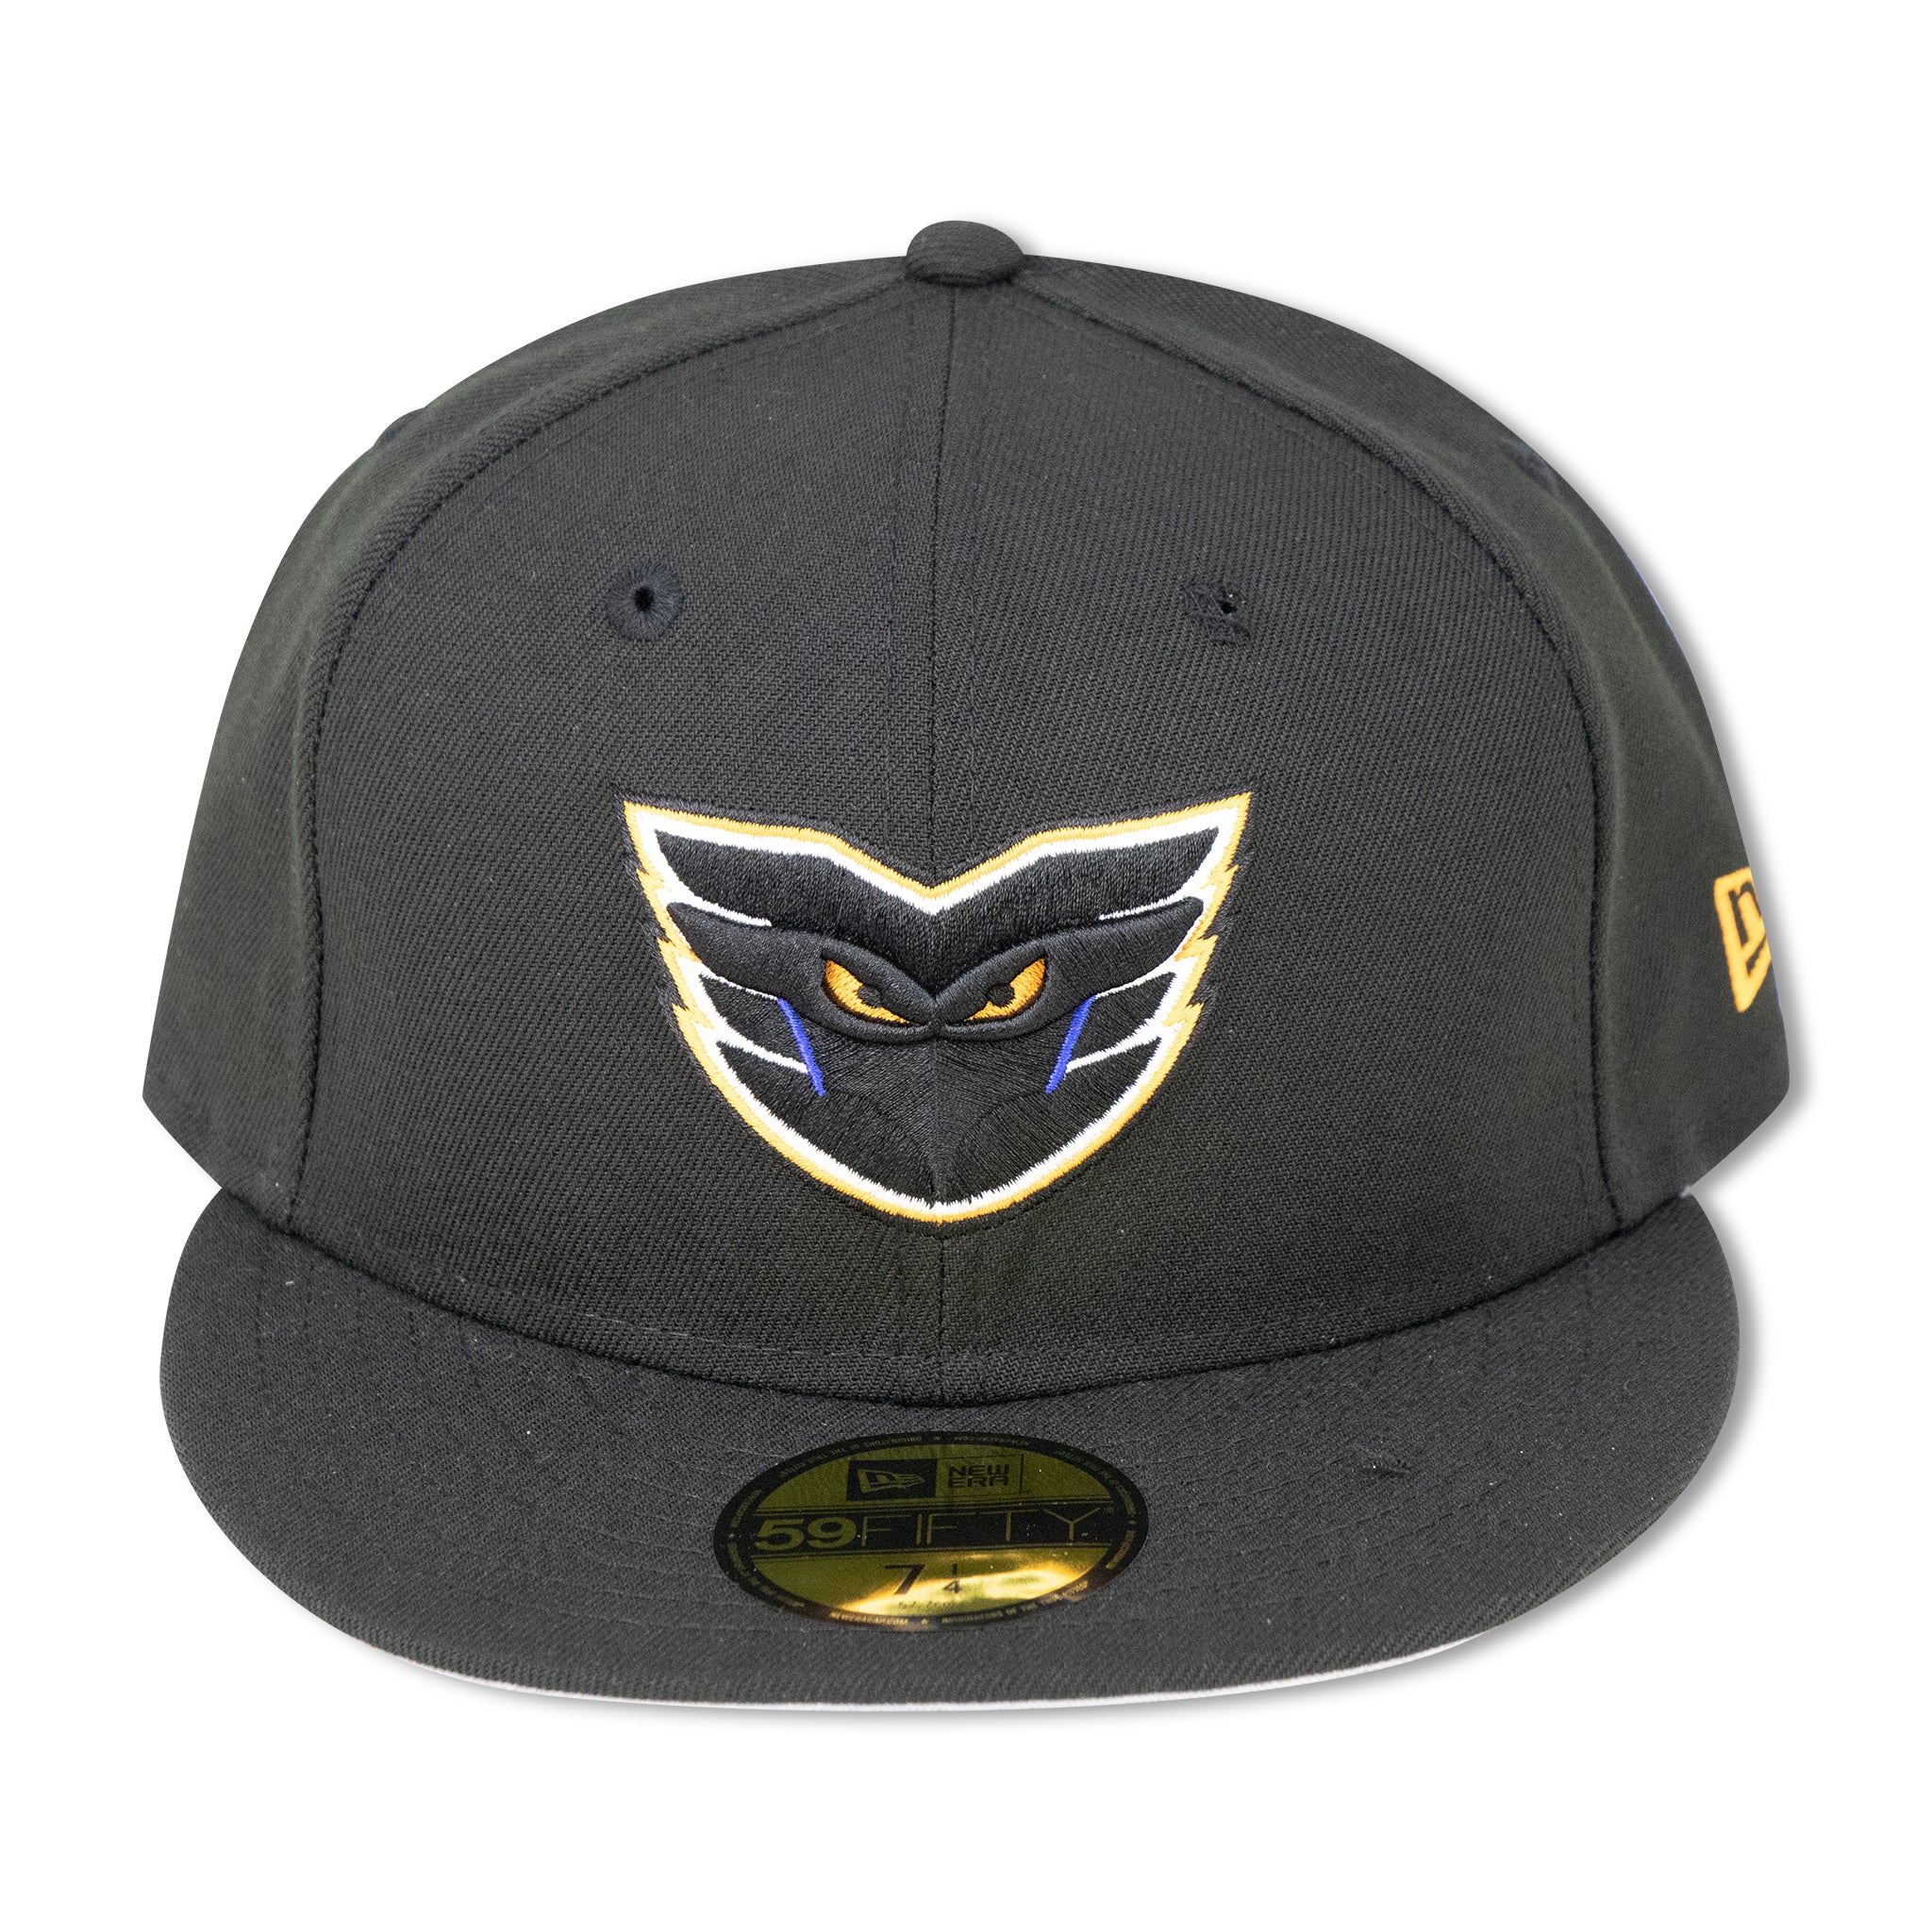 LEHIGH VALLEY PHANTOMS NEW ERA 59FIFTY FITTED